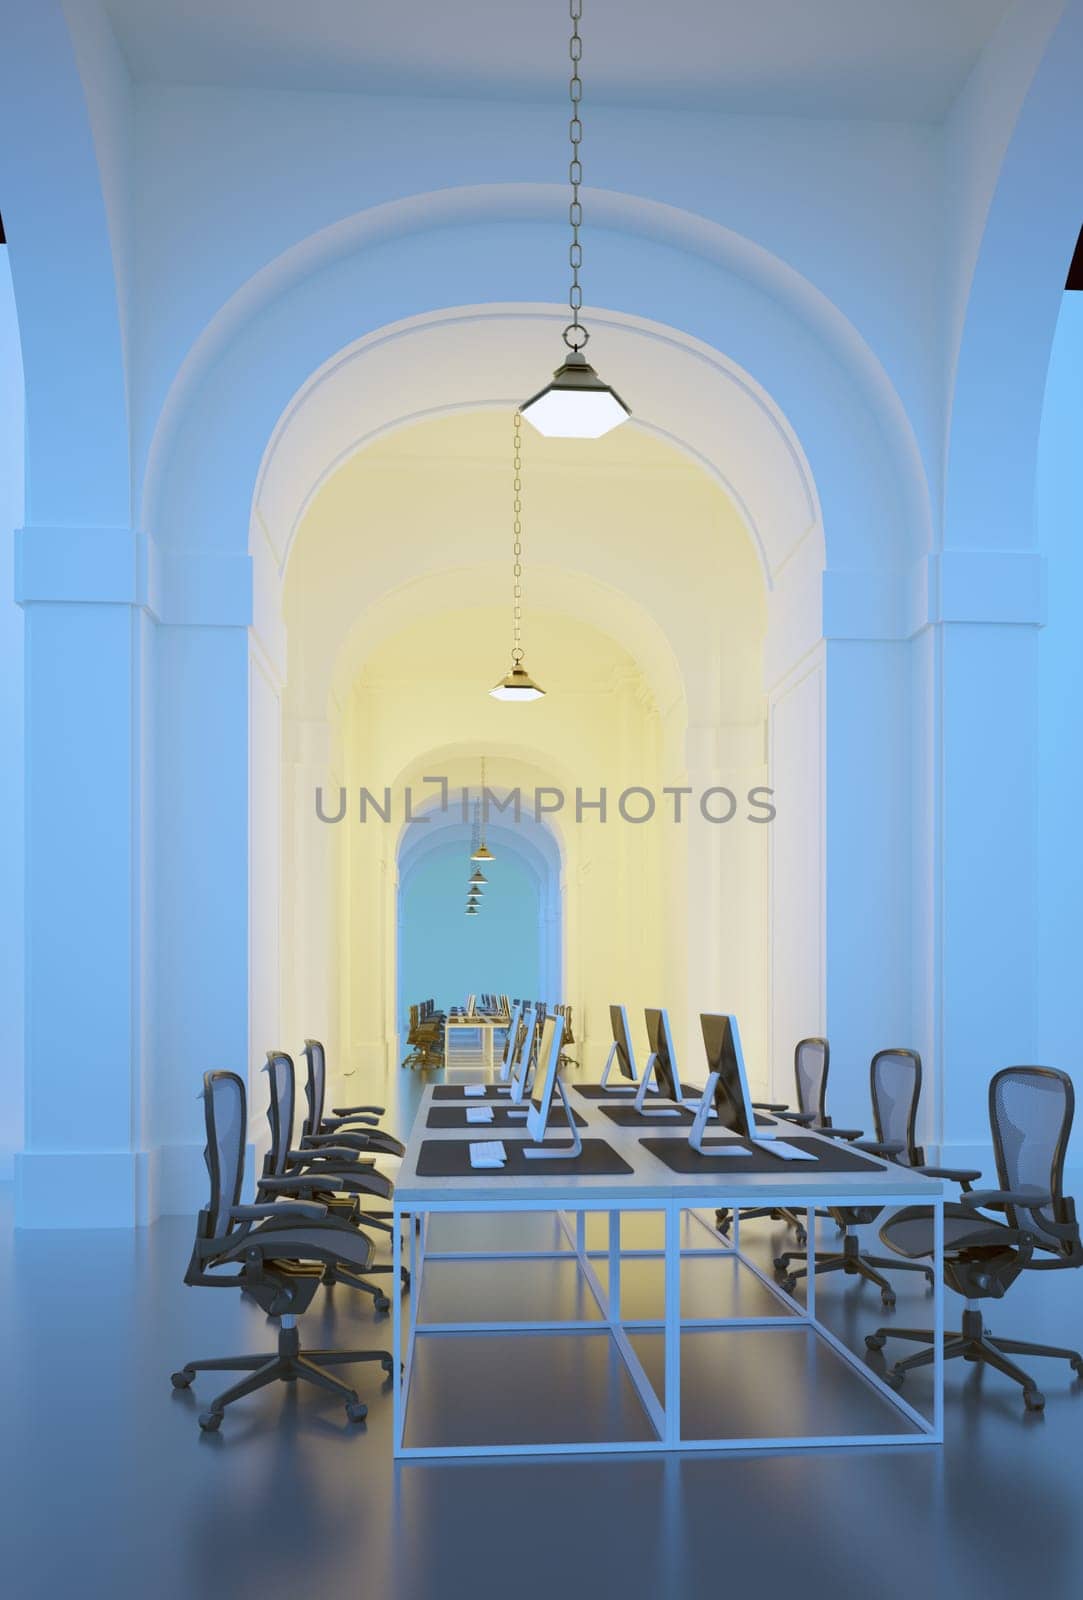 Interior of office with blue walls and arch. 3D rendering.